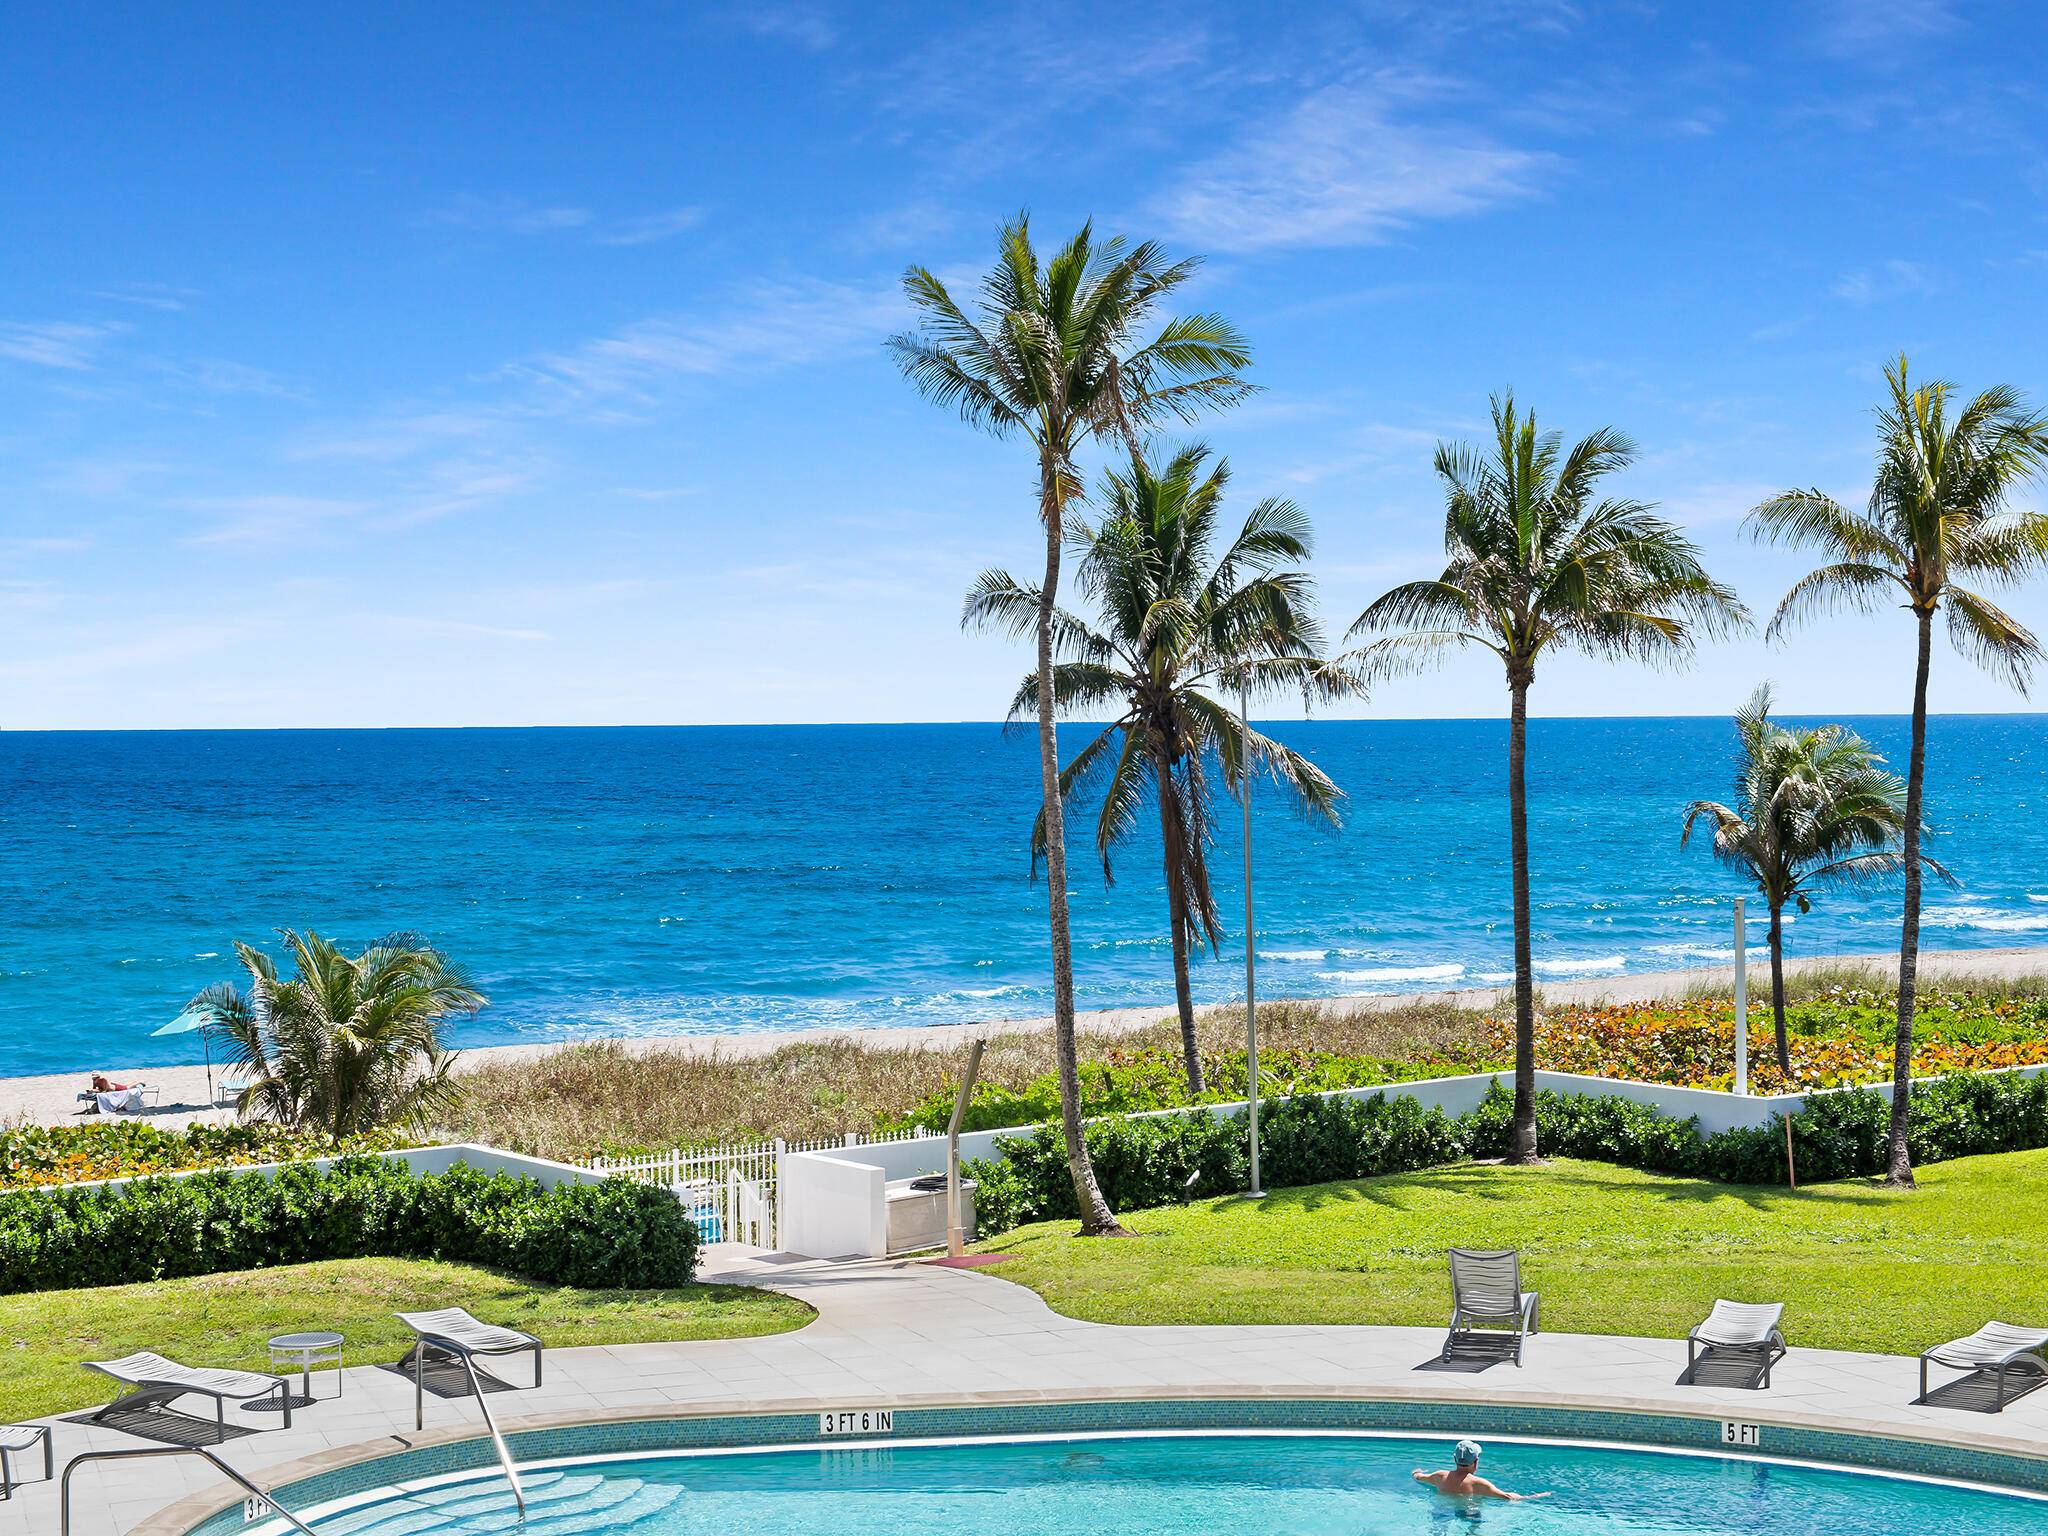 This condo boasts a direct ocean exposure, with over 1, 900 square feet air conditioned space plus large oceanfront balcony, with higher ceilings than most 8.